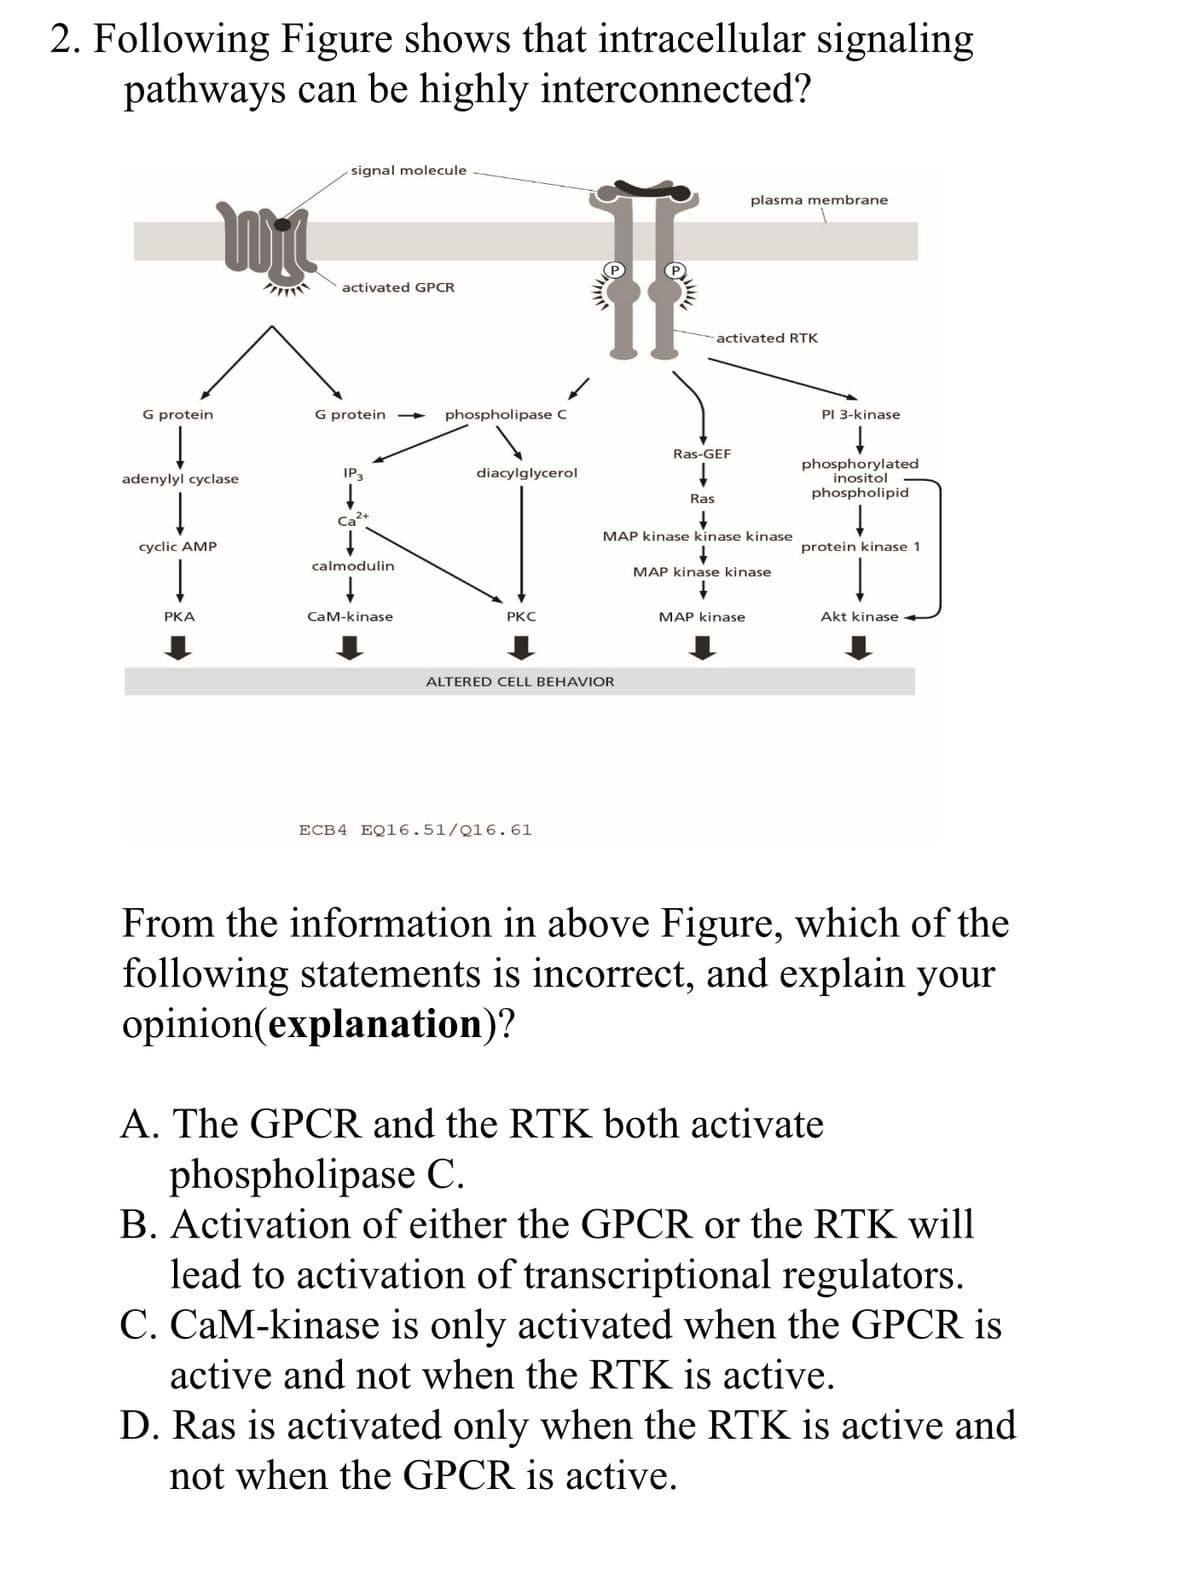 2. Following Figure shows that intracellular signaling
pathways can be highly interconnected?
signal molecule
plasma membrane
activated GPCR
activated RTK
G protein
G protein →
phospholipase C
PI 3-kinase
Ras-GEF
phosphorylated
inositol
phospholipid
adenylyl cyclase
IP3
diacylglycerol
Ras
Ca+
MAP kinase kinase kinase
cyclic AMP
protein kinase 1
calmodulin
MAP kinase kinase
PKA
CaM-kinase
РКС
MAP kinase
Akt kinase
ALTERED CELL BEHAVIOR
ECB4 EQ16.51/Q16.61
From the information in above Figure, which of the
following statements is incorrect, and explain your
opinion(explanation)?
A. The GPCR and the RTK both activate
phospholipase C.
B. Activation of either the GPCR or the RTK will
lead to activation of transcriptional regulators.
C. CaM-kinase is only activated when the GPCR is
active and not when the RTK is active.
D. Ras is activated only when the RTK is active and
not when the GPCR is active.
